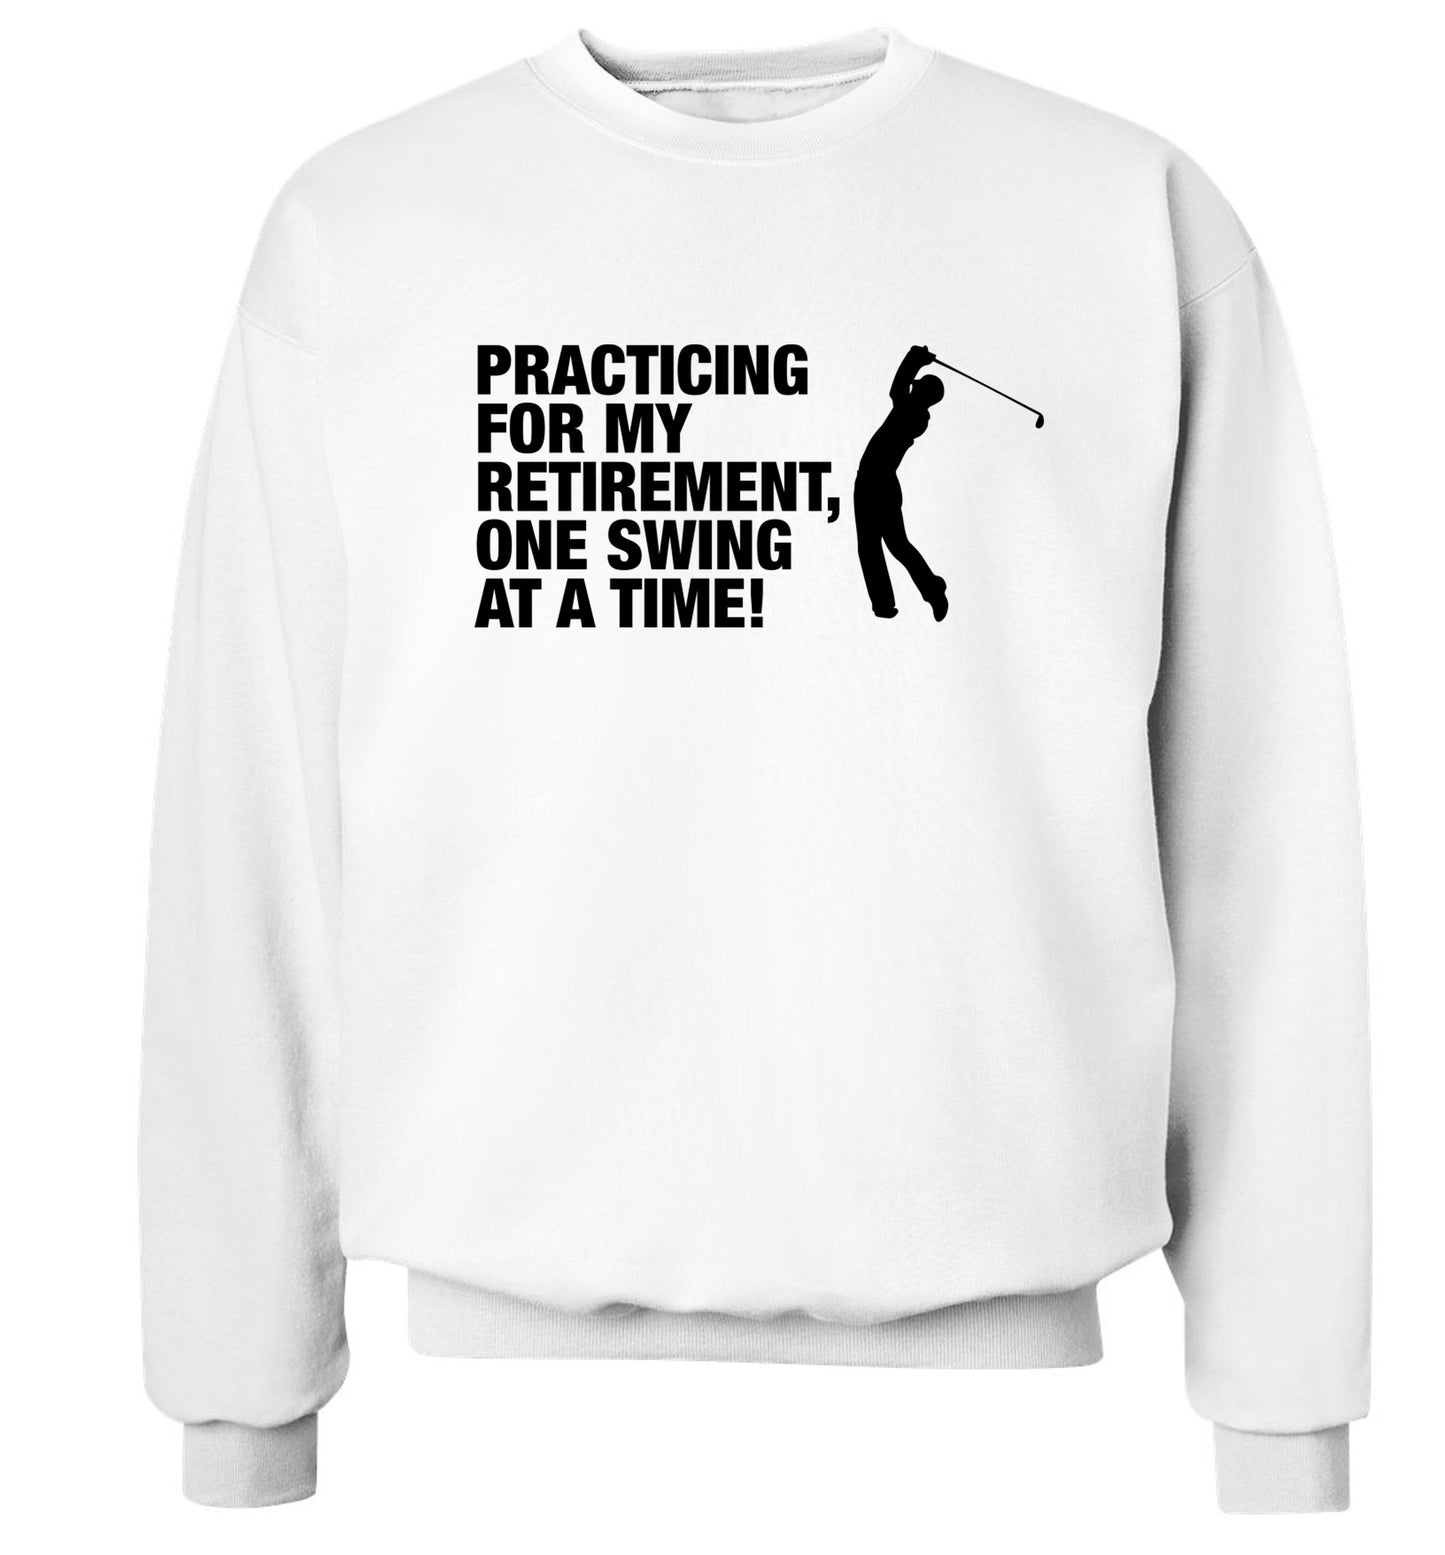 Practicing for my retirement one swing at a time Adult's unisex white Sweater 2XL